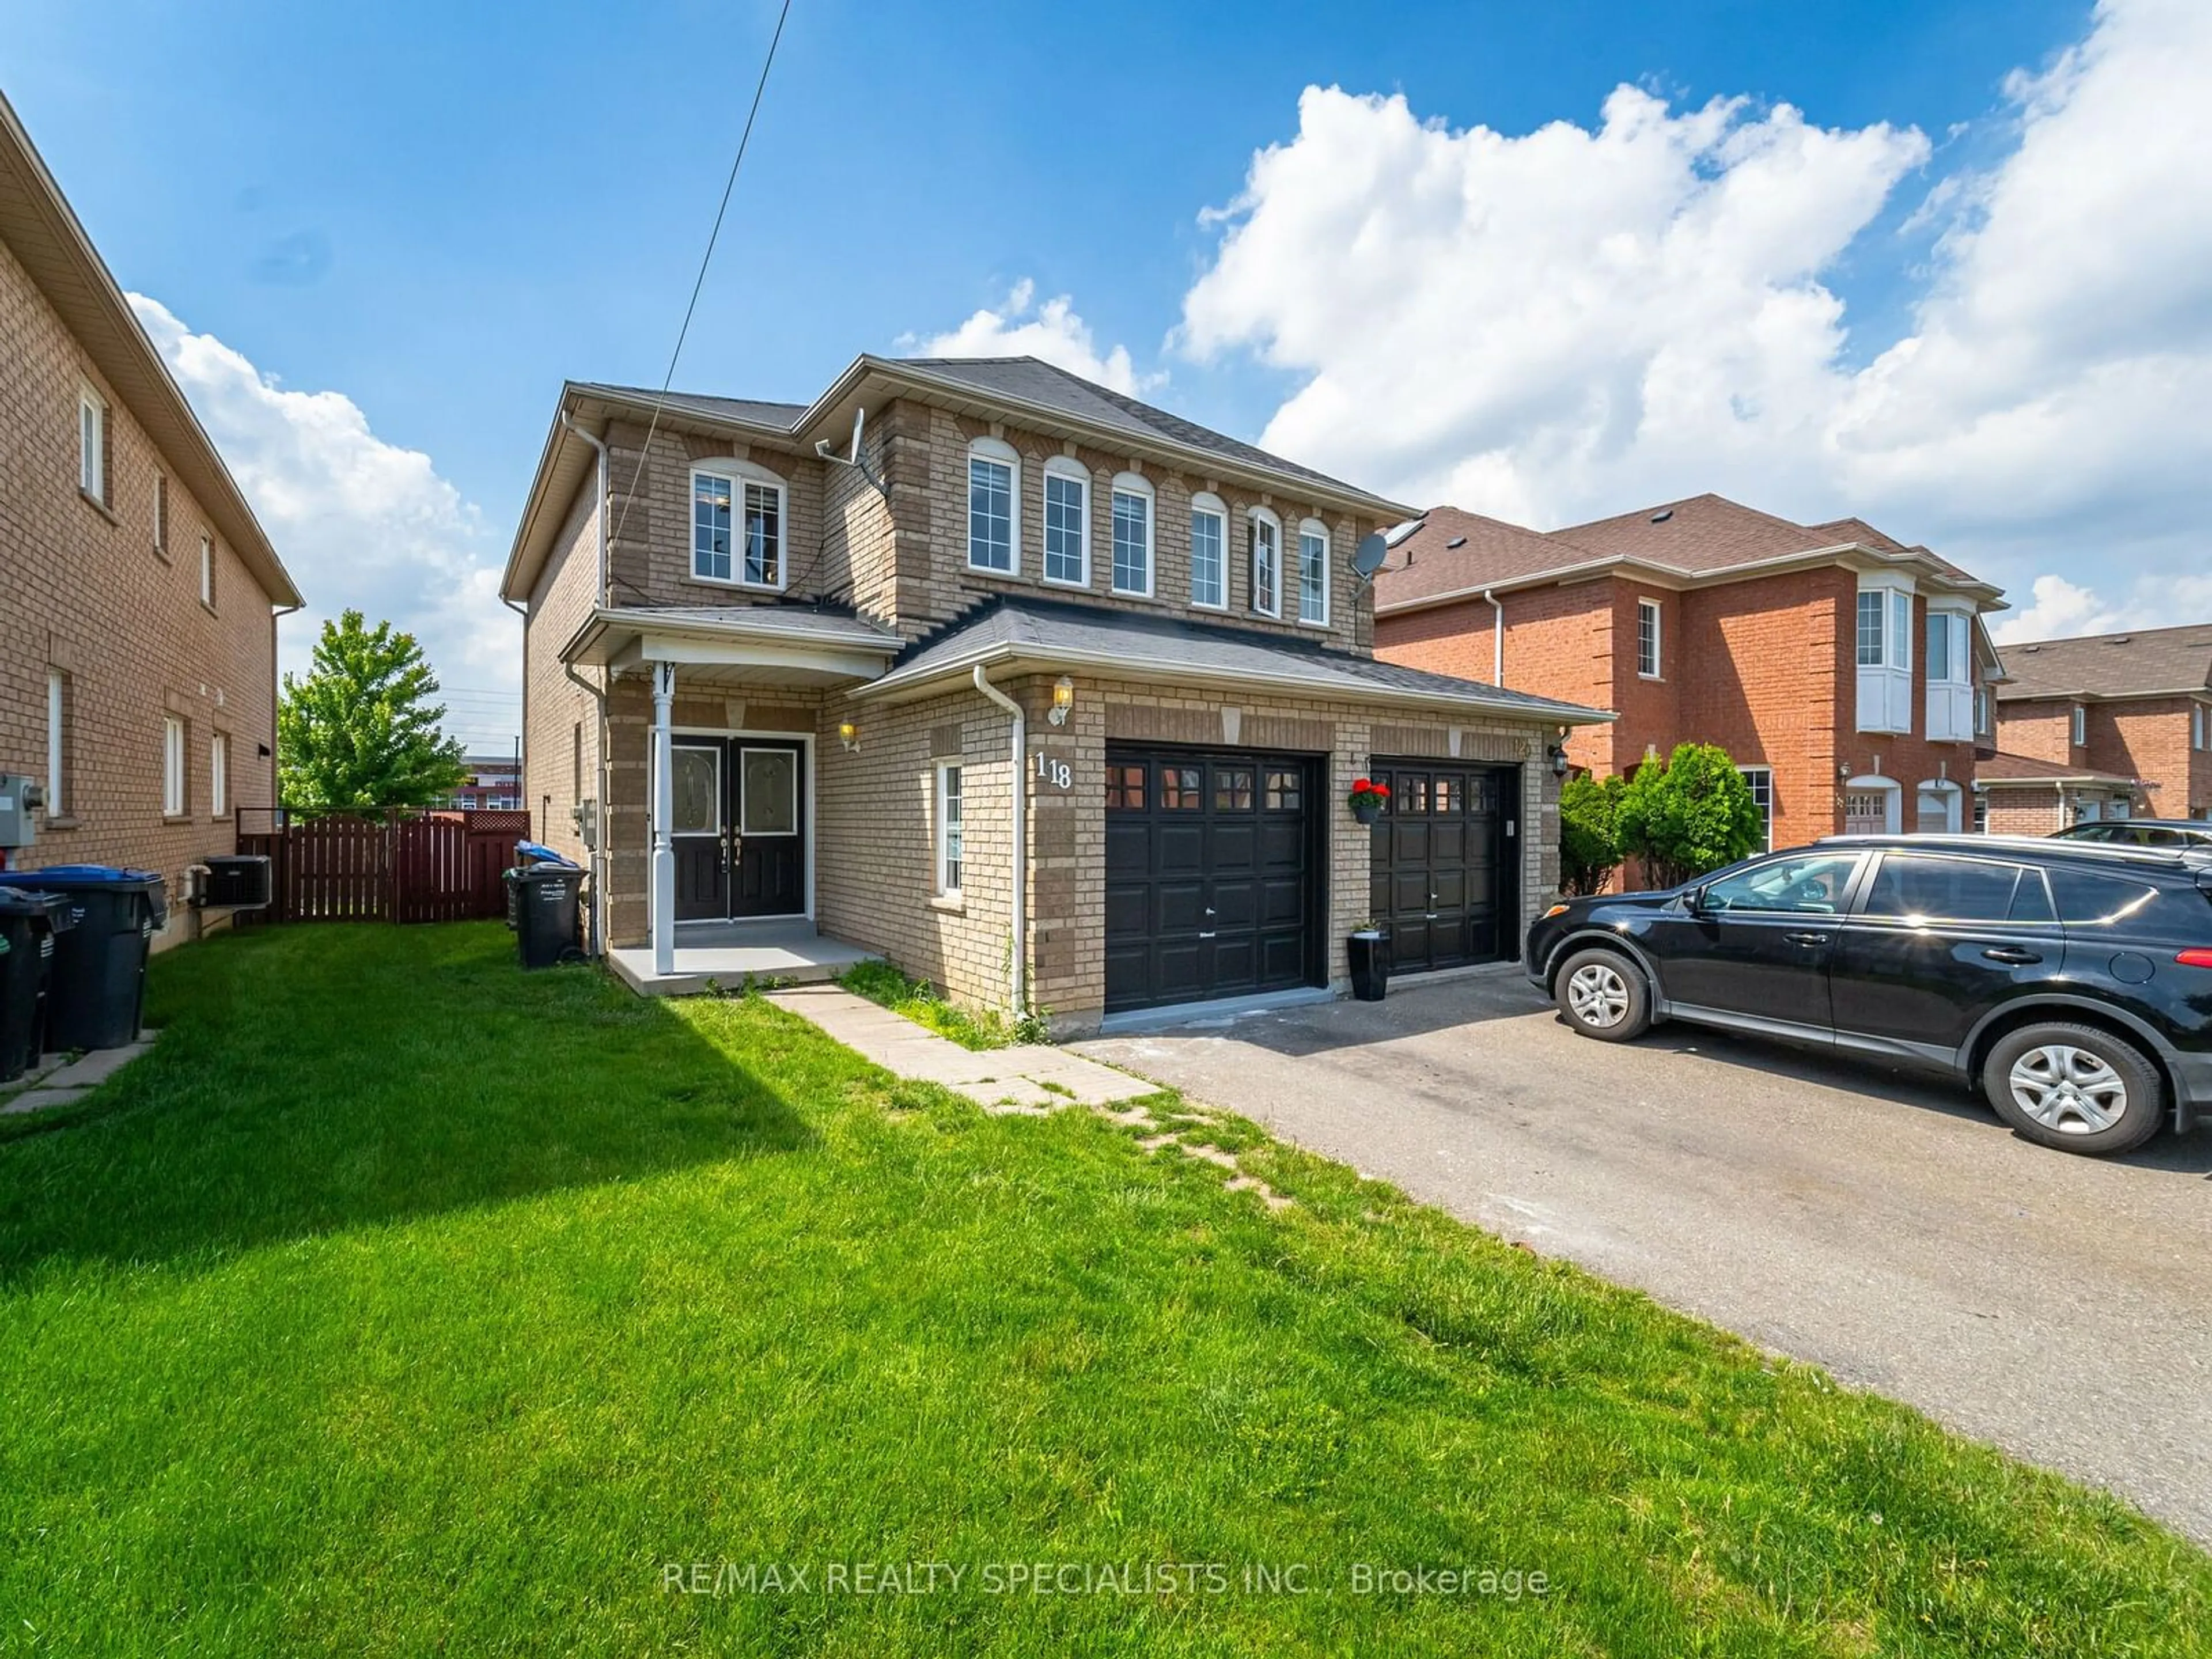 Home with brick exterior material for 118 Native Landing Cres, Brampton Ontario L6X 5A7